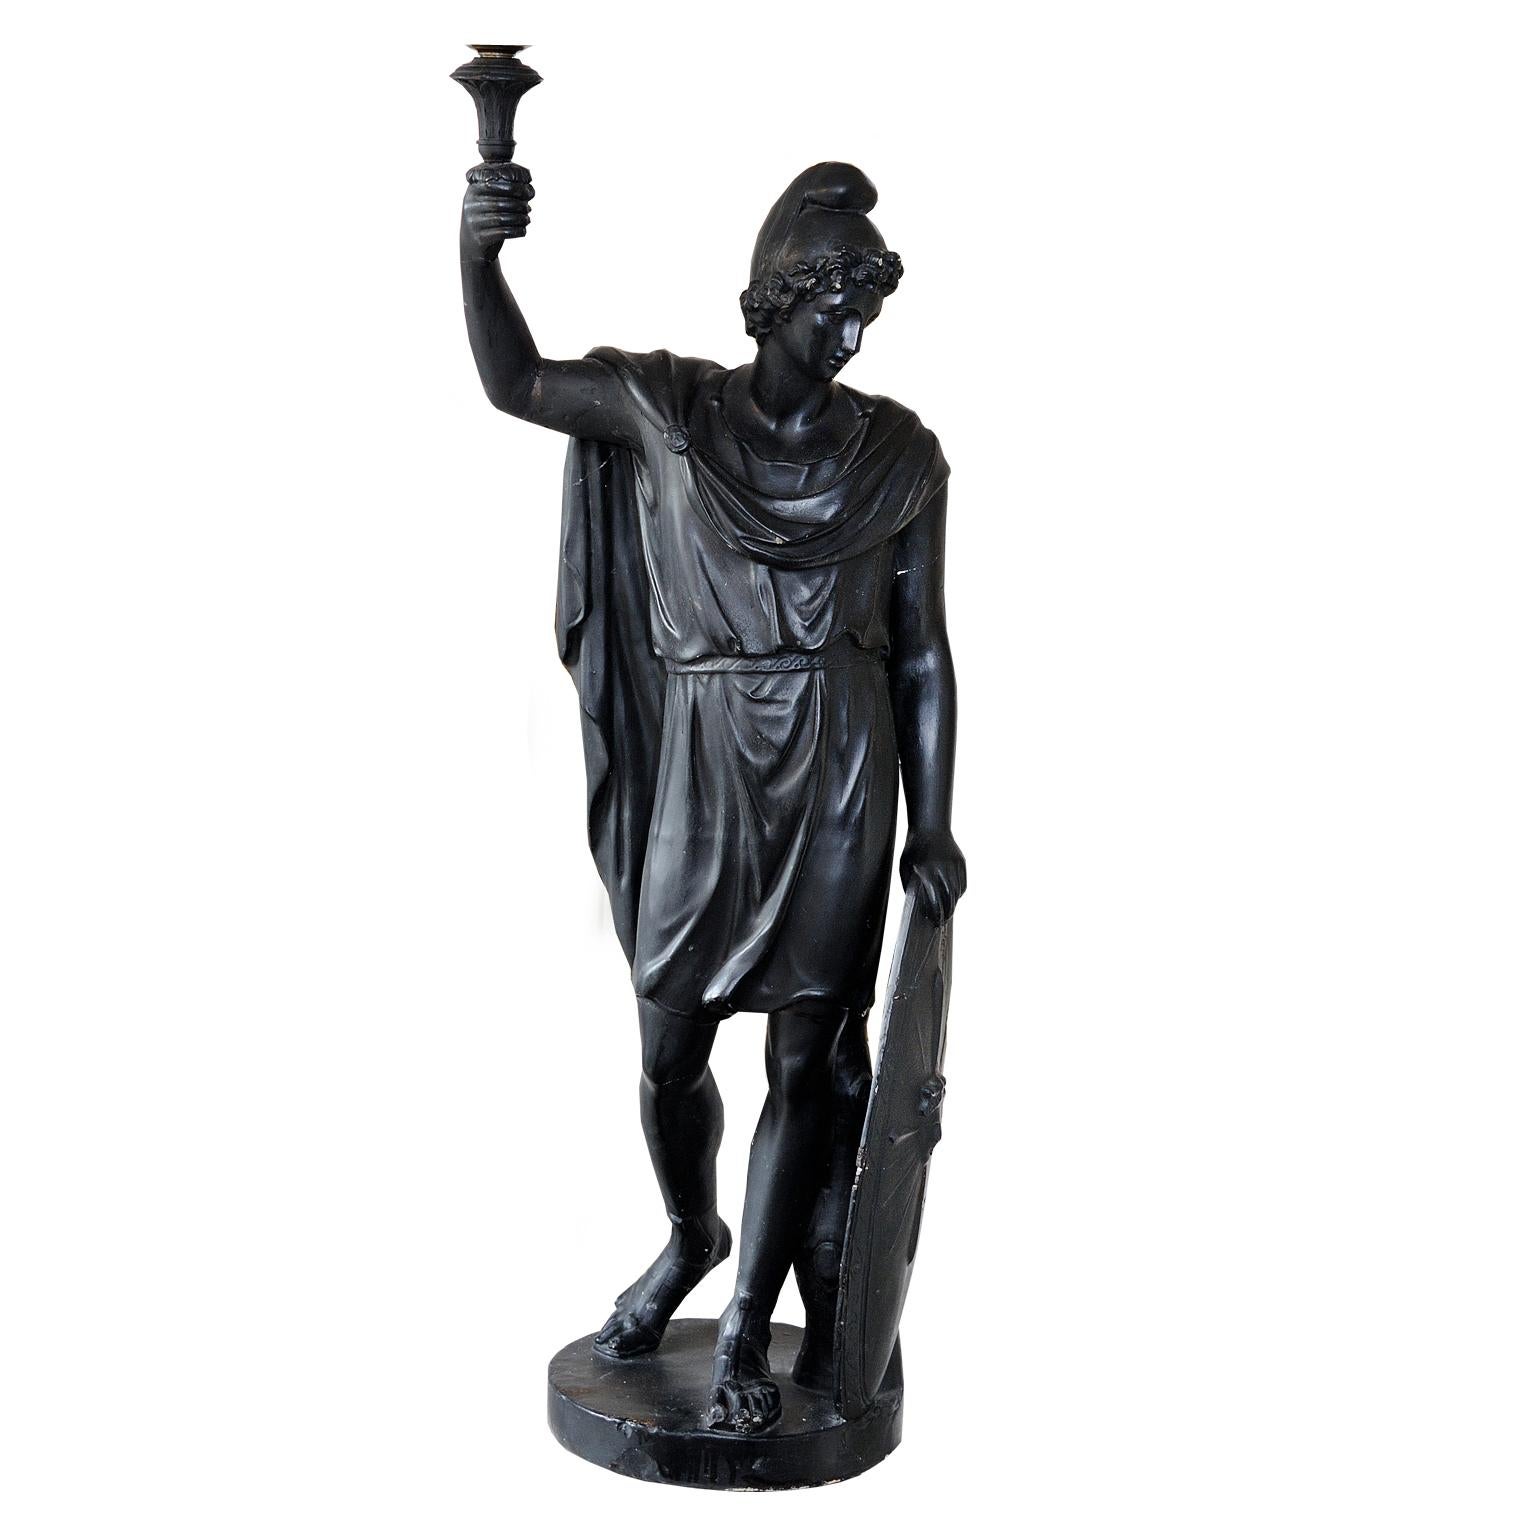 This is a large and striking English Regency faux bronze plaster statue holding a shield and candle sconce, depicting the Greek mythological figure Paris, also known as Alexander (